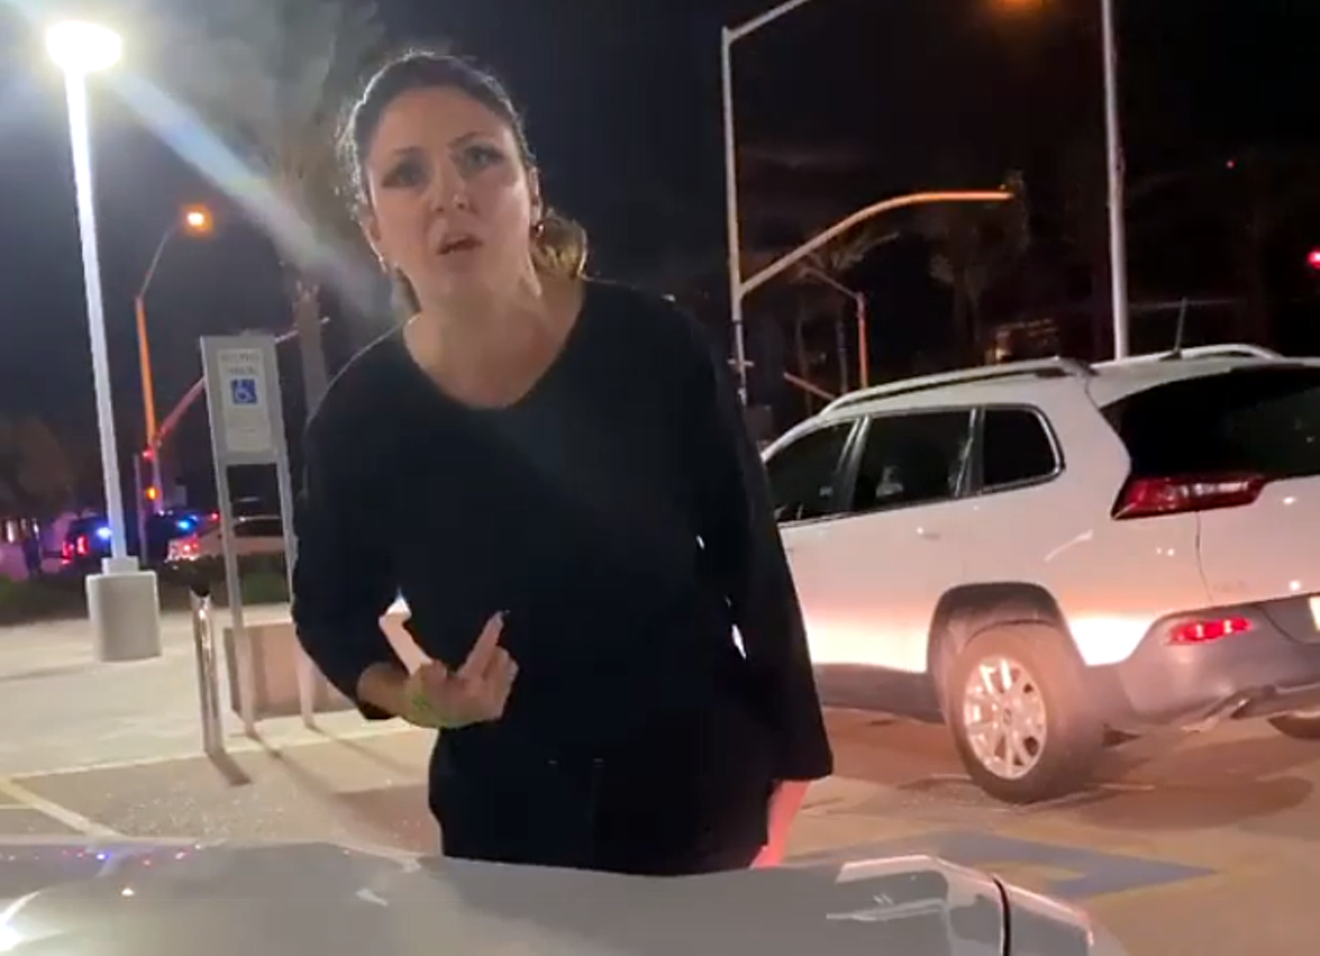 In a video viewed 6 million times, Esther Jordan confronts two black men in the parking lot of Mercedes Benz of Scottsdale.